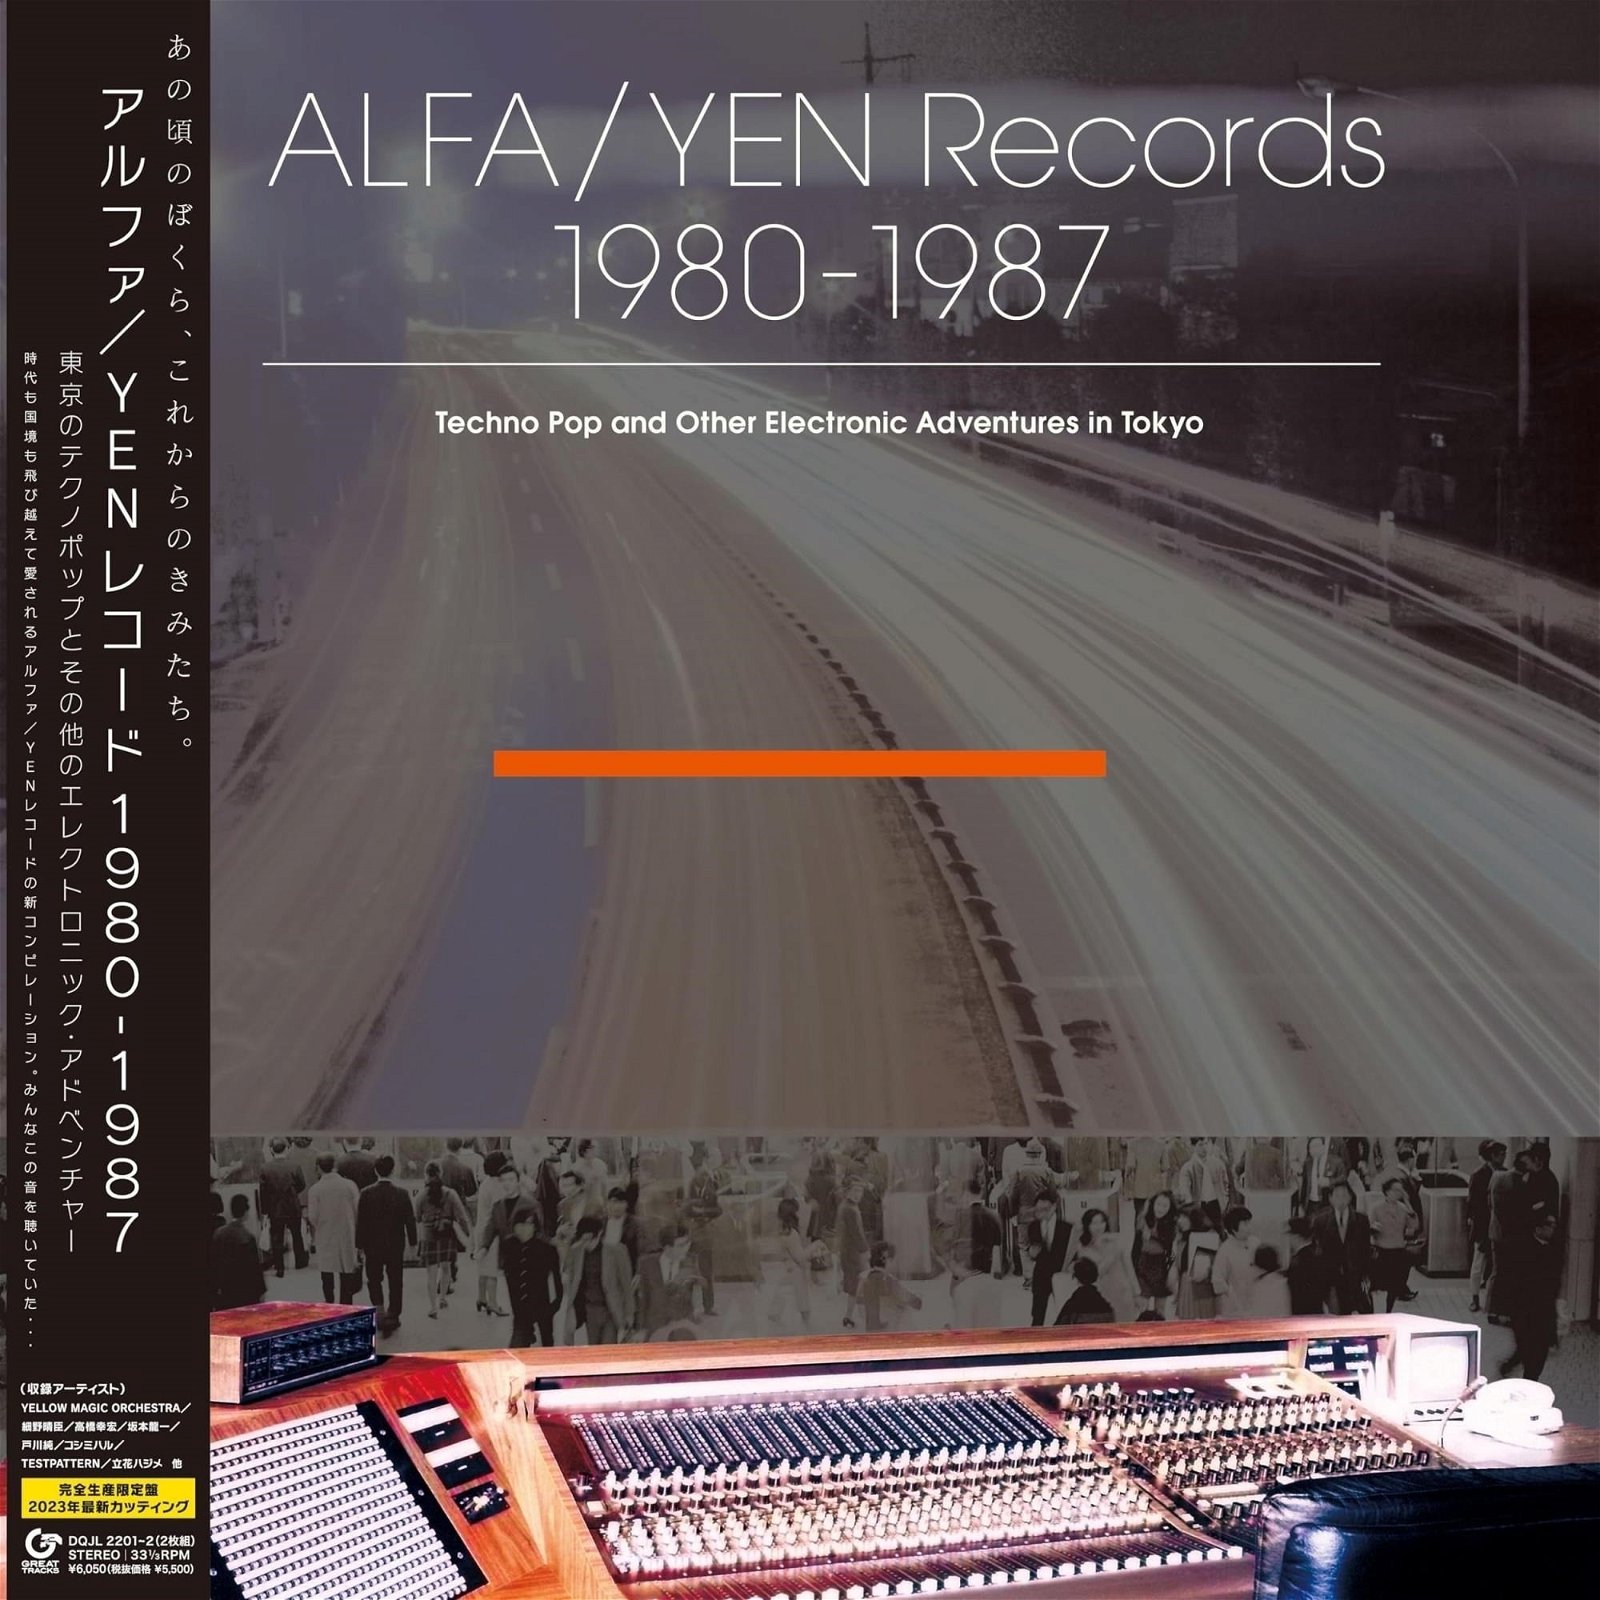 CD Shop - V/A ALFA/YEN RECORDS 1980-1987: TECHNO POP AND OTHER ELECTRONIC ADVENTURES IN TOKYO